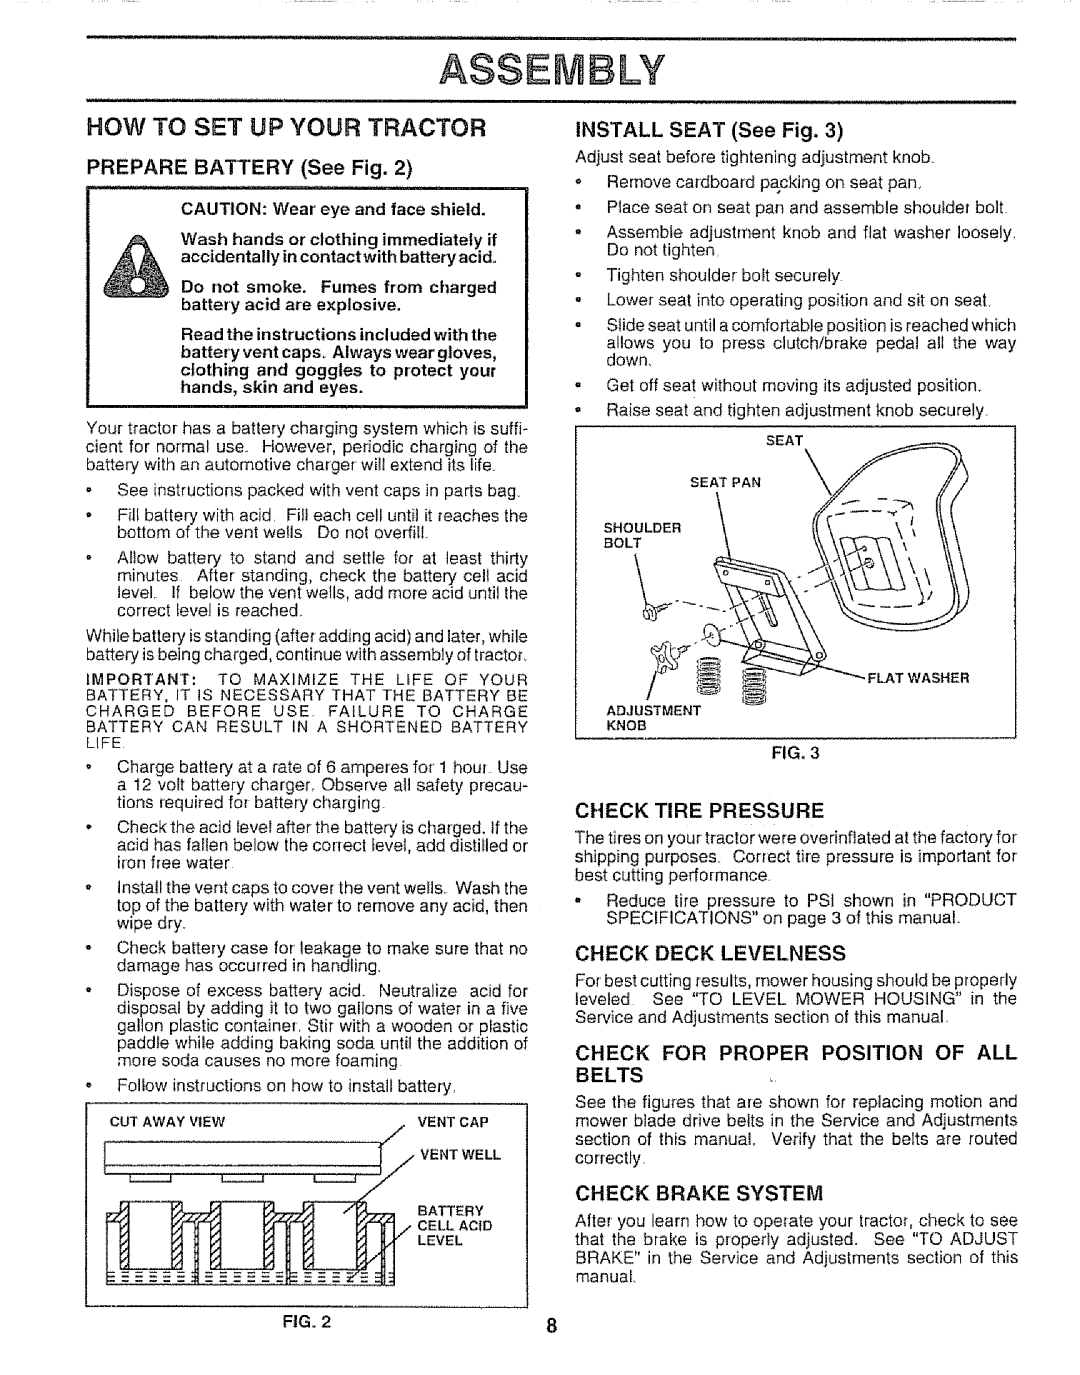 Sears 917.257651 How To Set Up Your Tractor, PREPARE BATTERY See Fig, INSTALL SEAT See Fig, Check Brake System, Assembly 